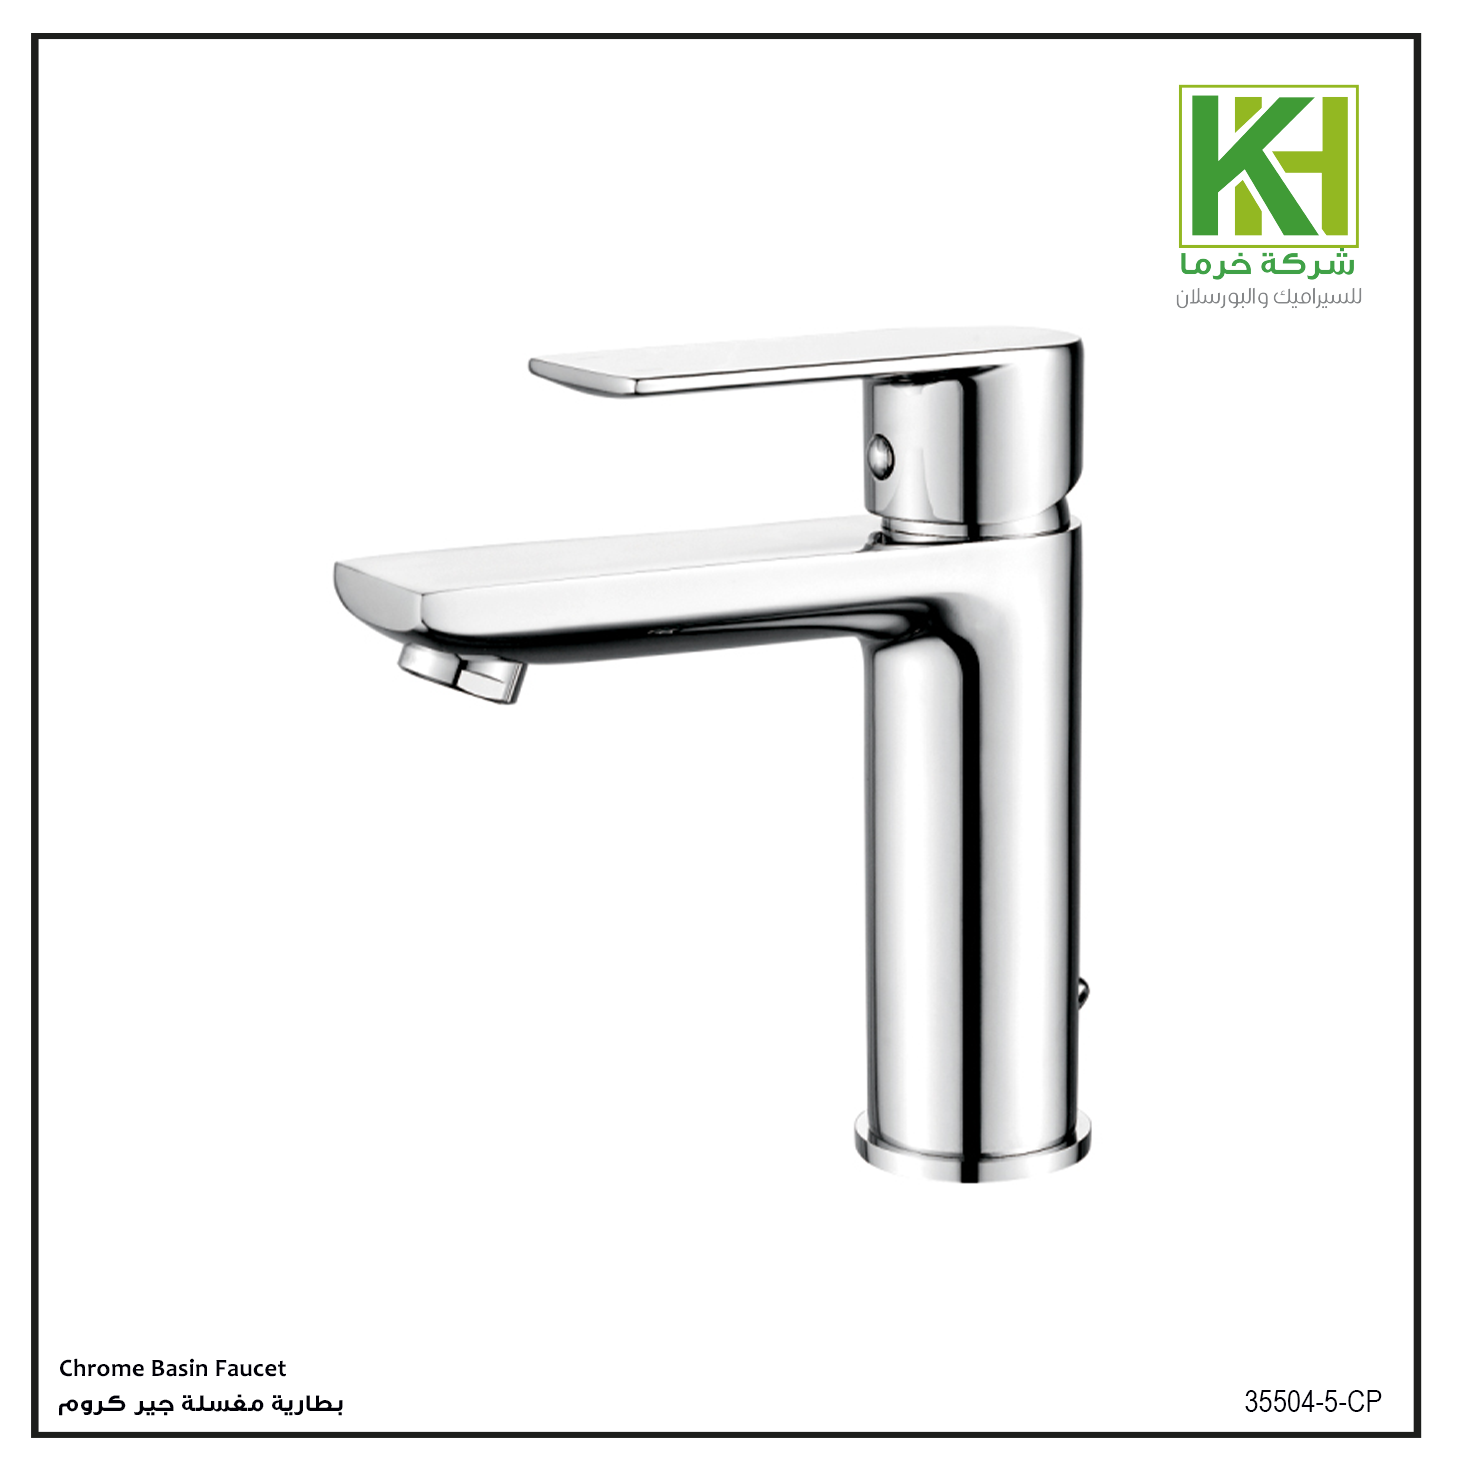 Picture of Chrome Basin Faucet